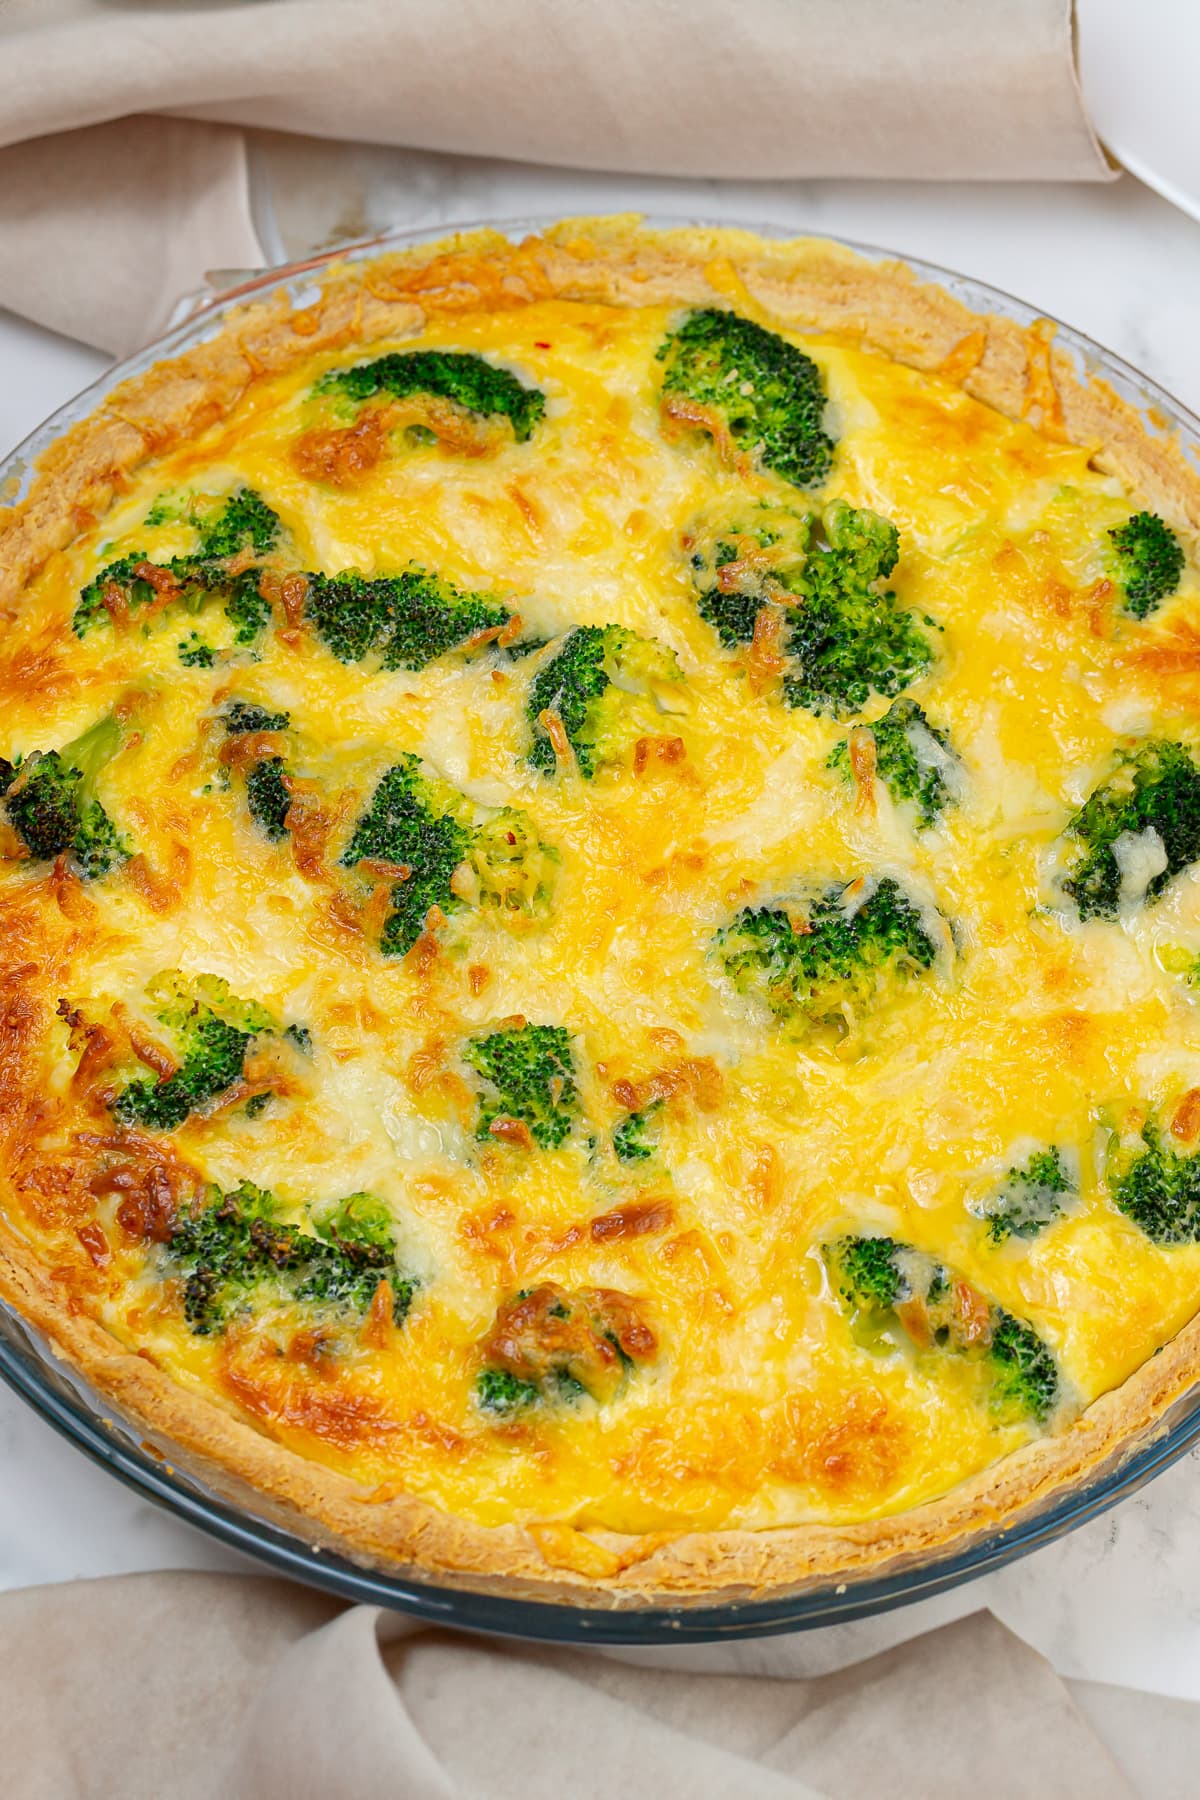 Freshly baked broccoli cheddar quiche in a glass pie dish, showing a golden-brown surface with broccoli florets and melted cheese.